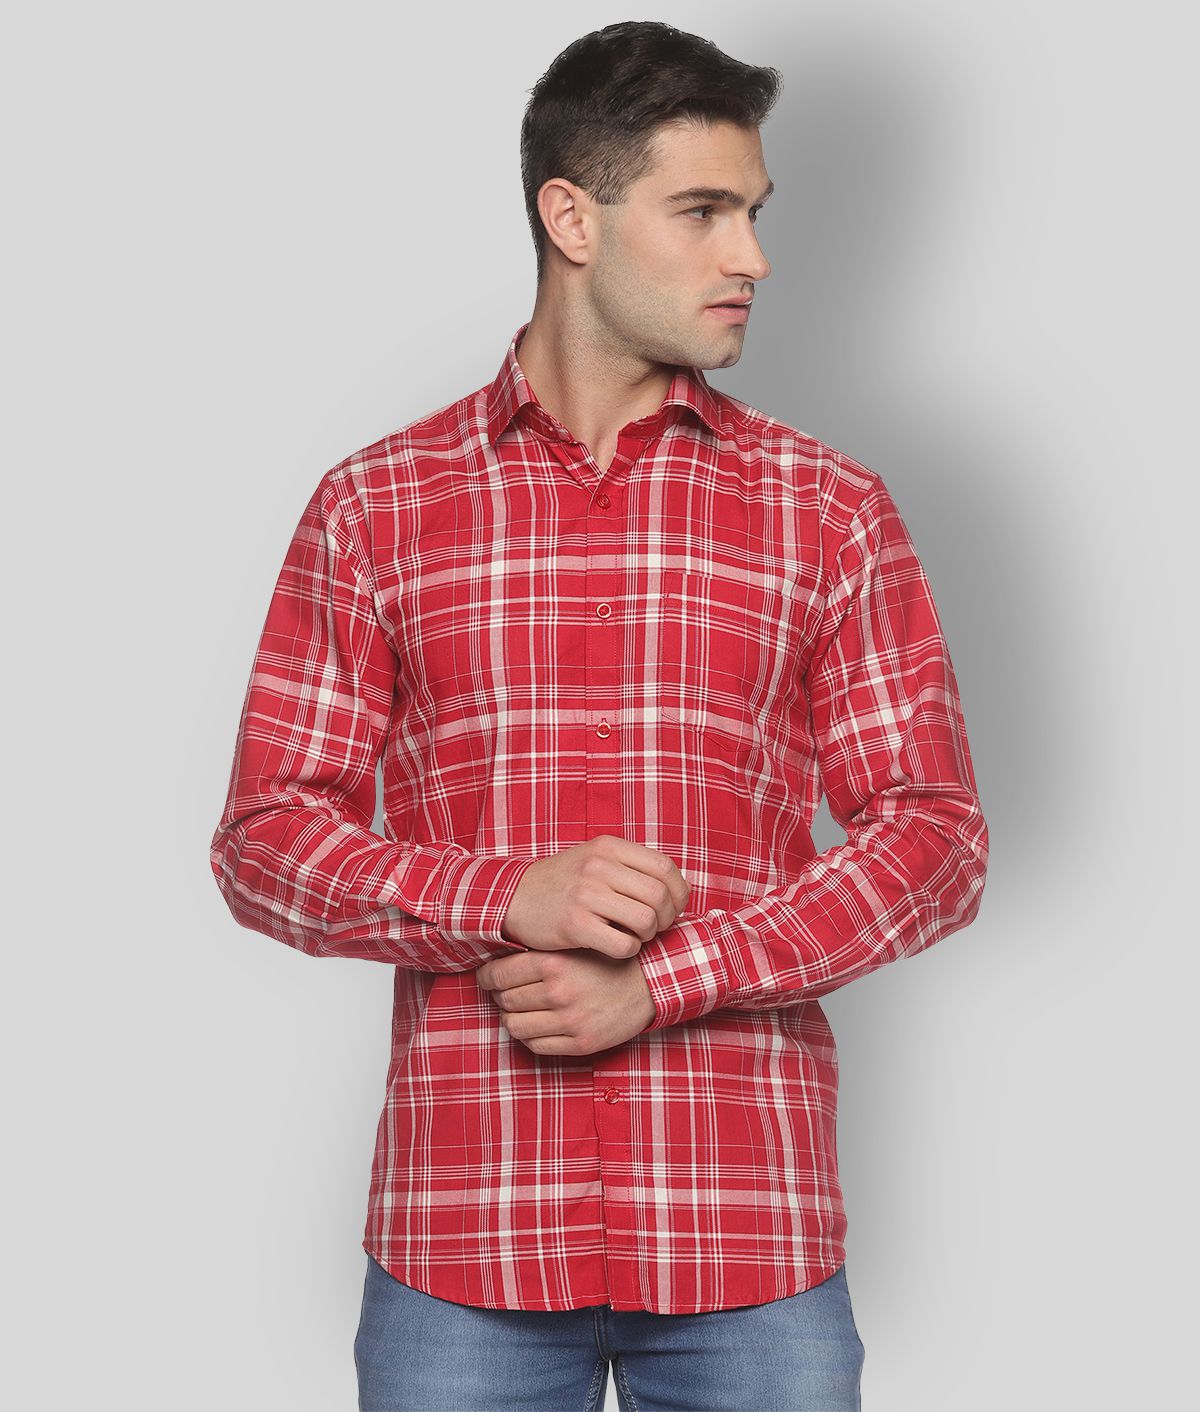     			YHA - Red 100% Cotton Regular Fit Men's Casual Shirt ( Pack of 1 )